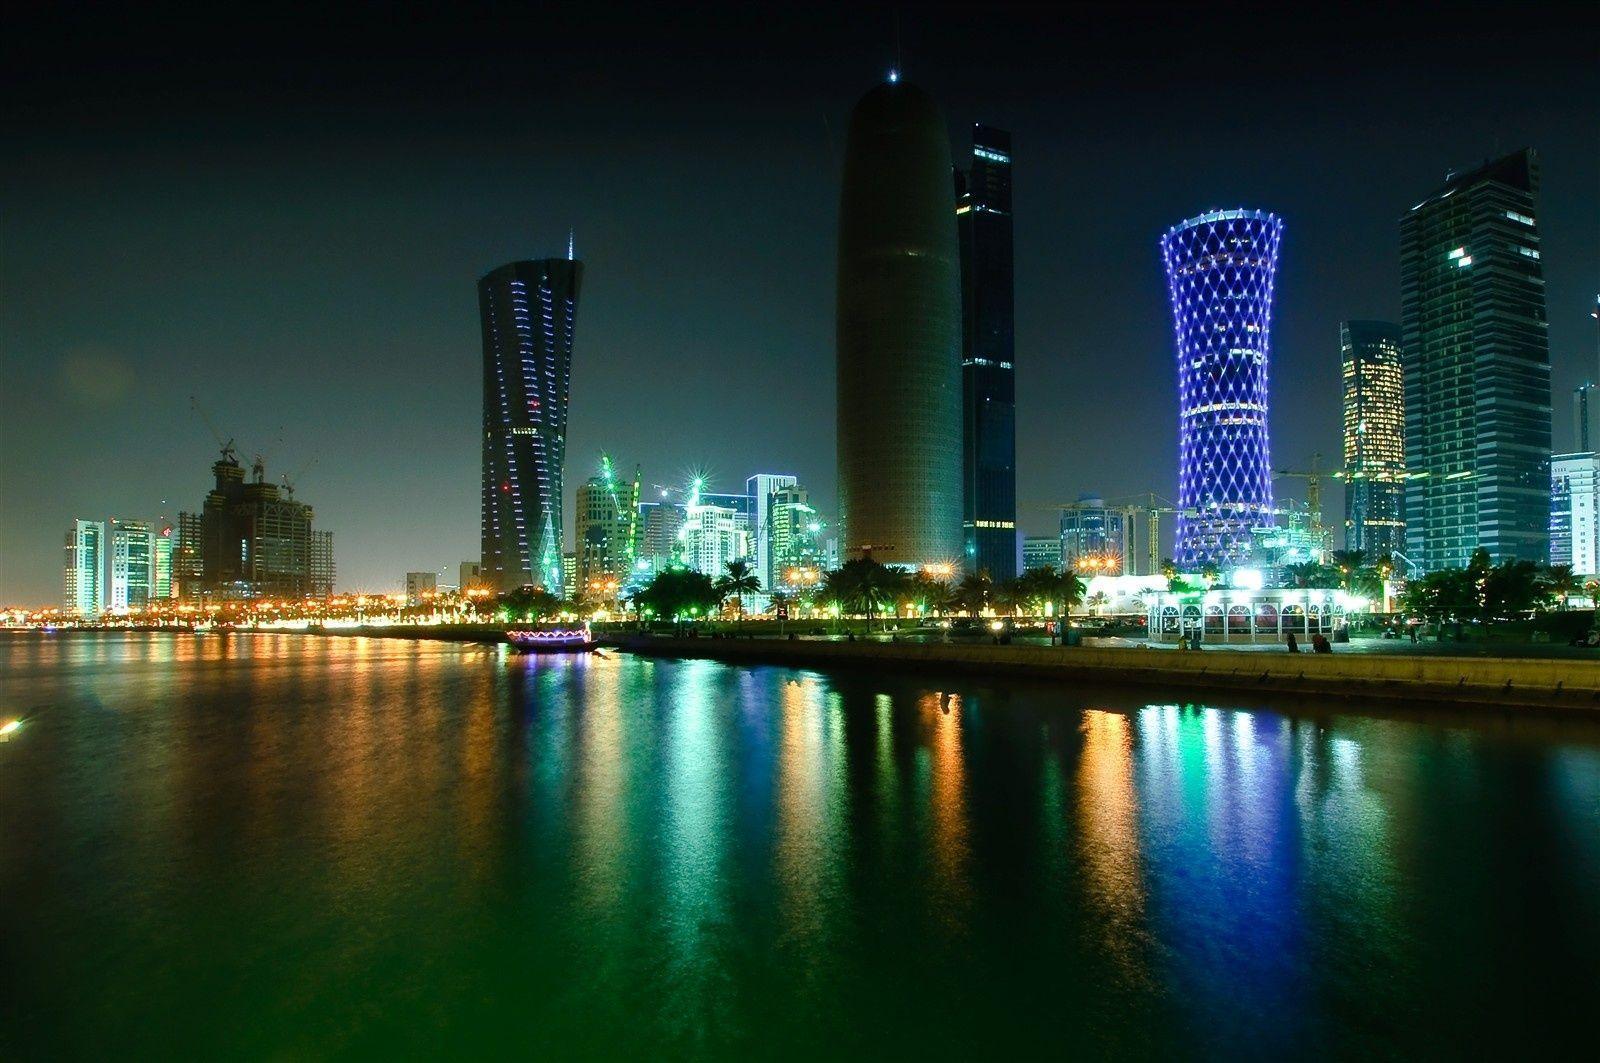 NW66: Qatar Wallpaper, Qatar Picture In High Quality, Wallpaper